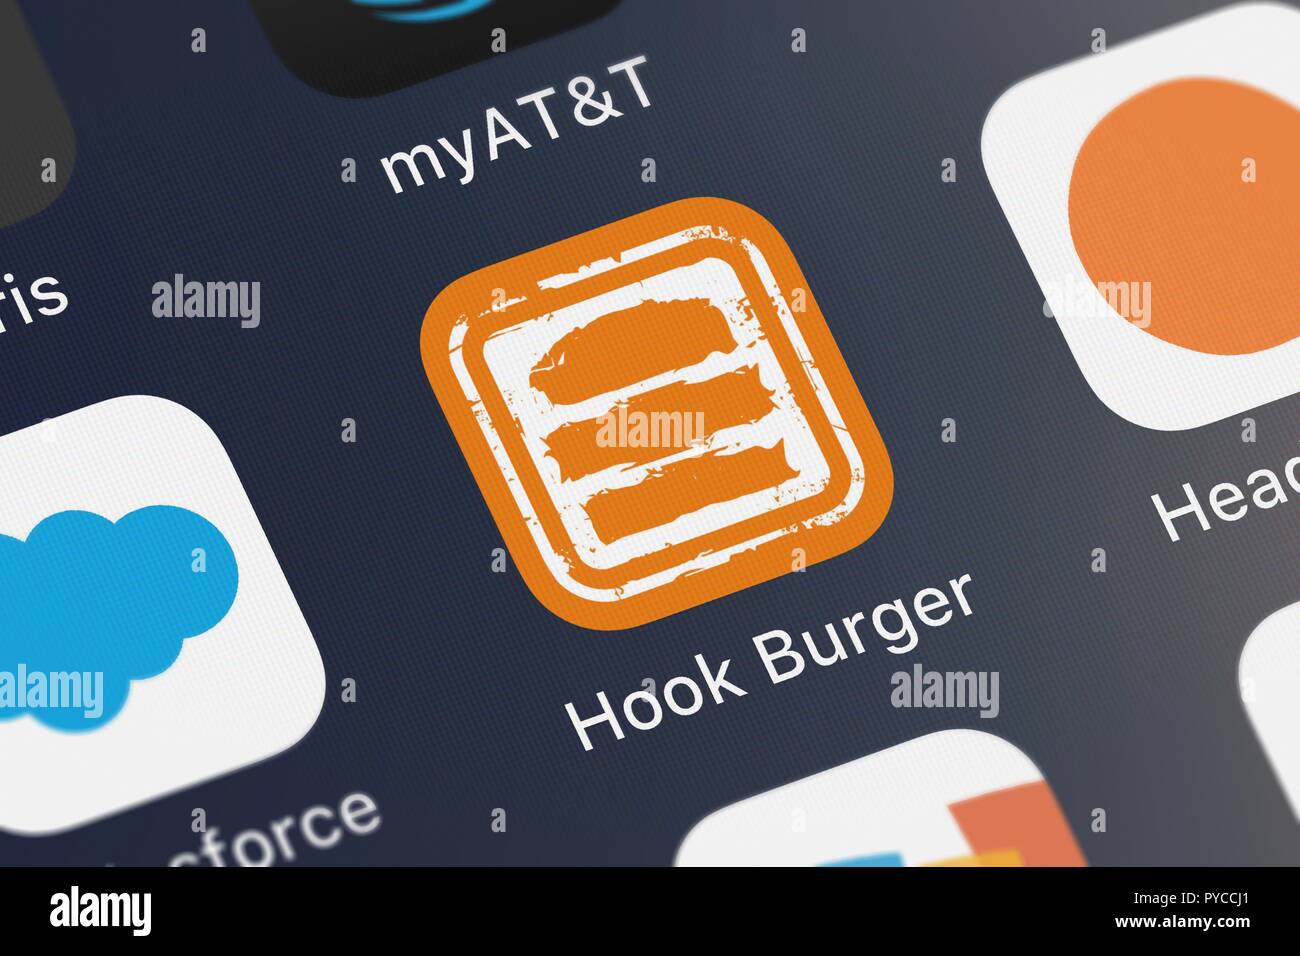 London, United Kingdom - October 26, 2018: Close-up shot of the Hook Burger mobile app from LevelUp Consulting, LLC. Stock Photo